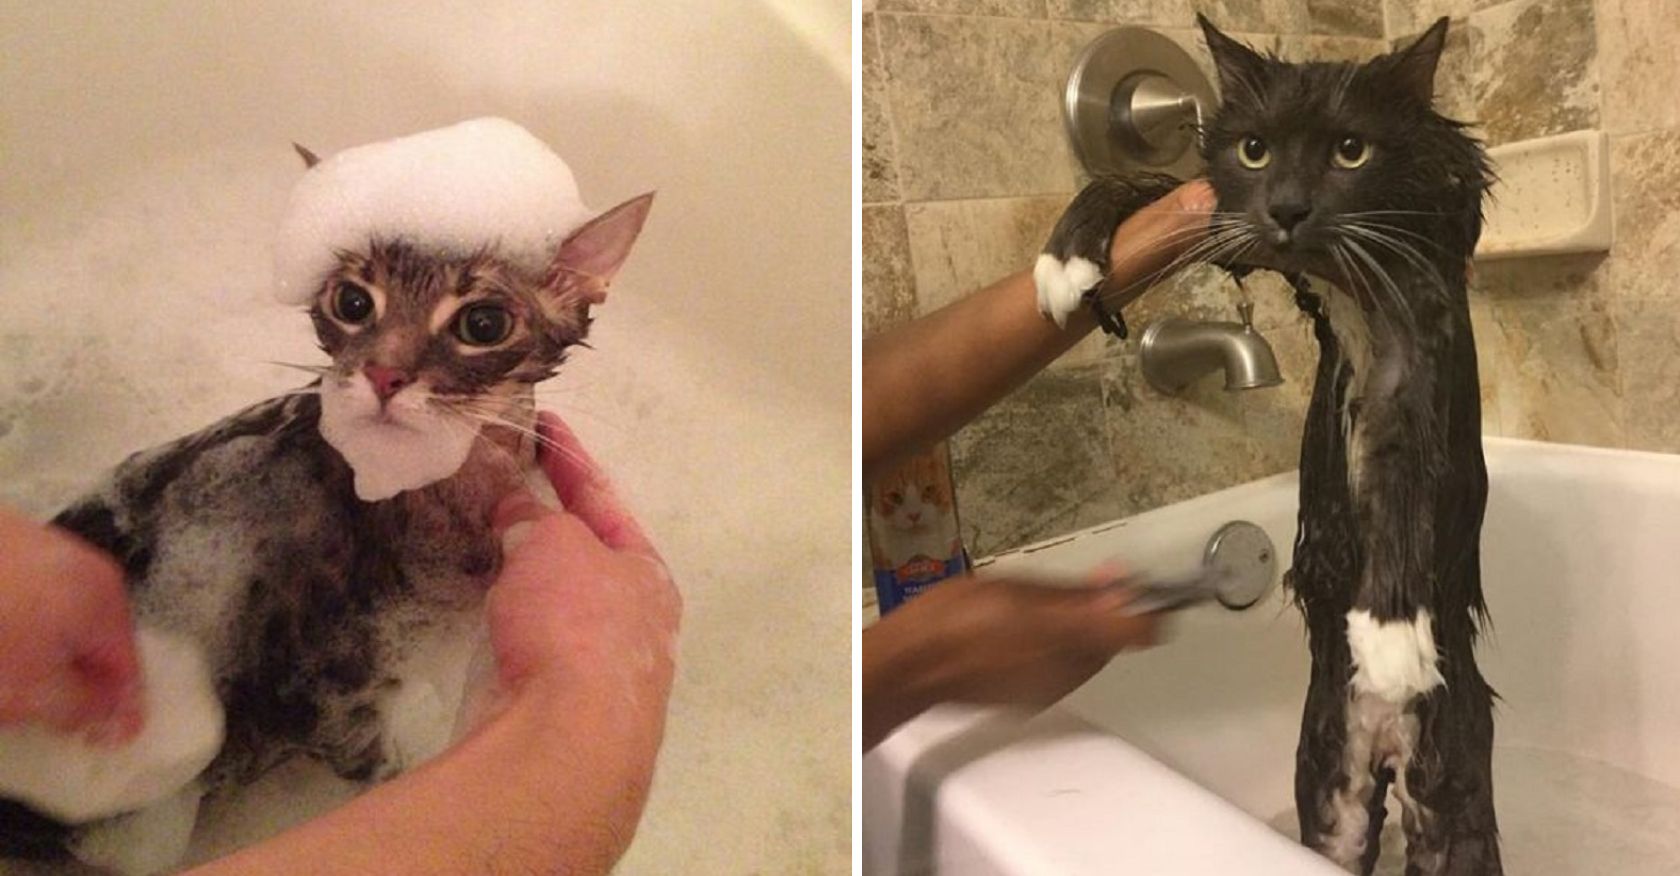 Purr-fectly Adorable: A Cat's Bath Time Charms